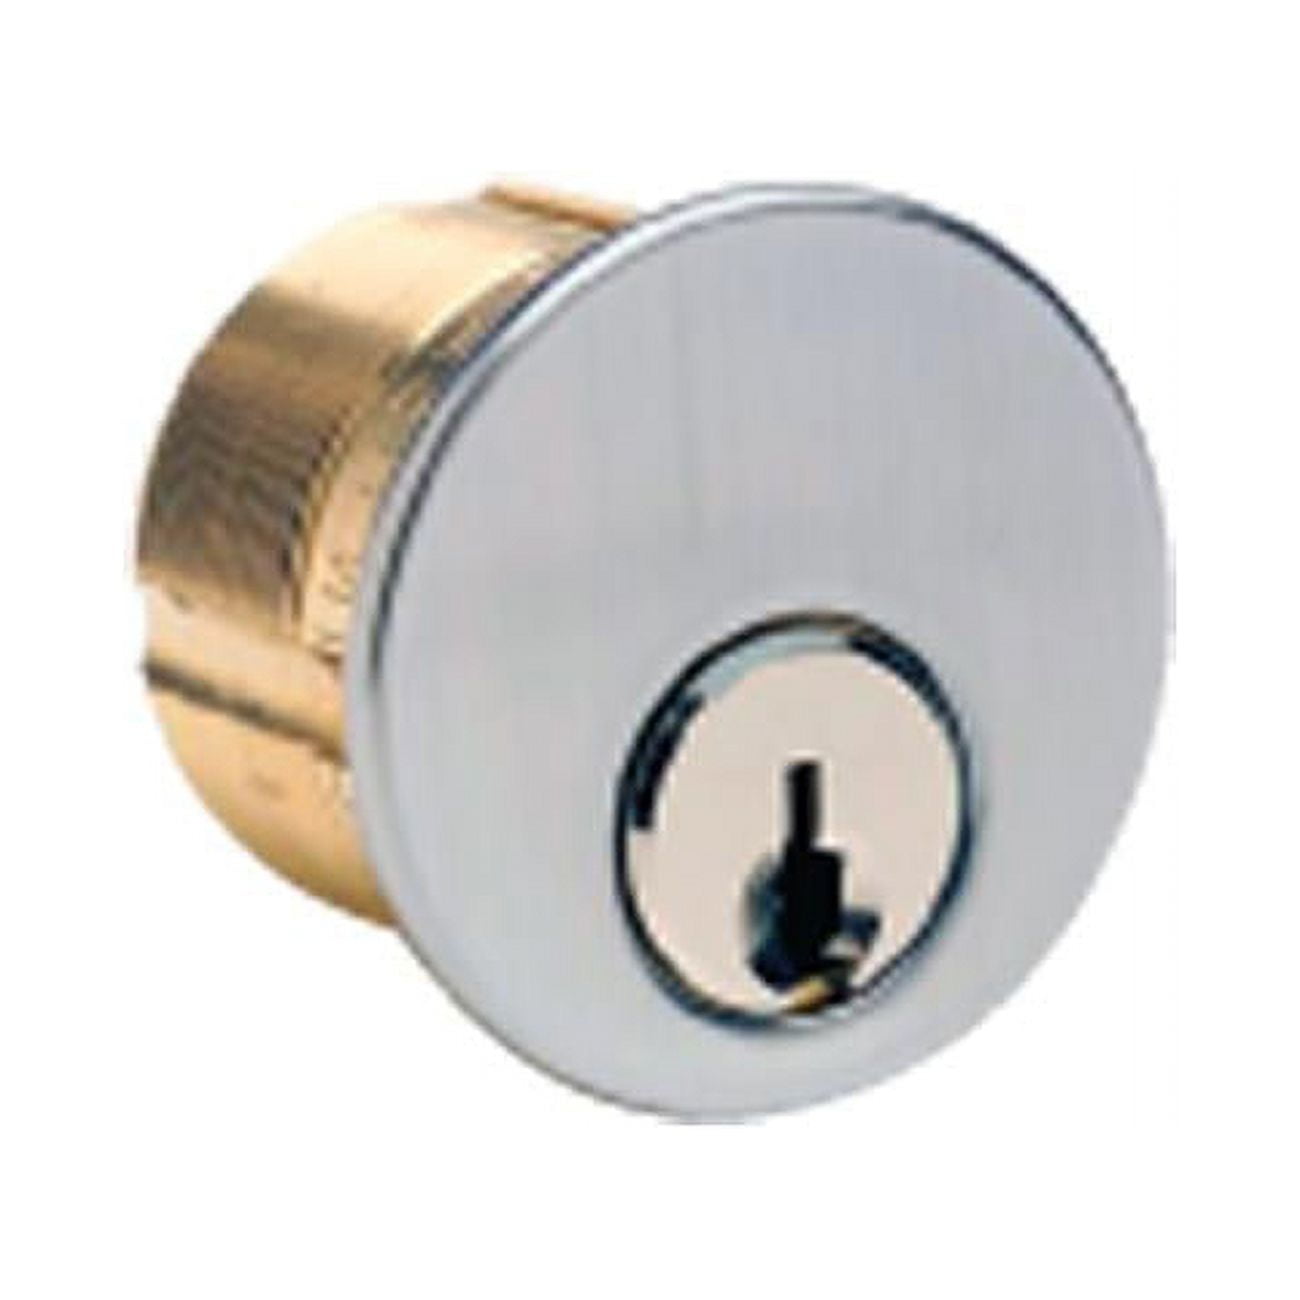 5001729 Kw9 Brass Mortise Cylinder Keyed Differently - Case Of 10